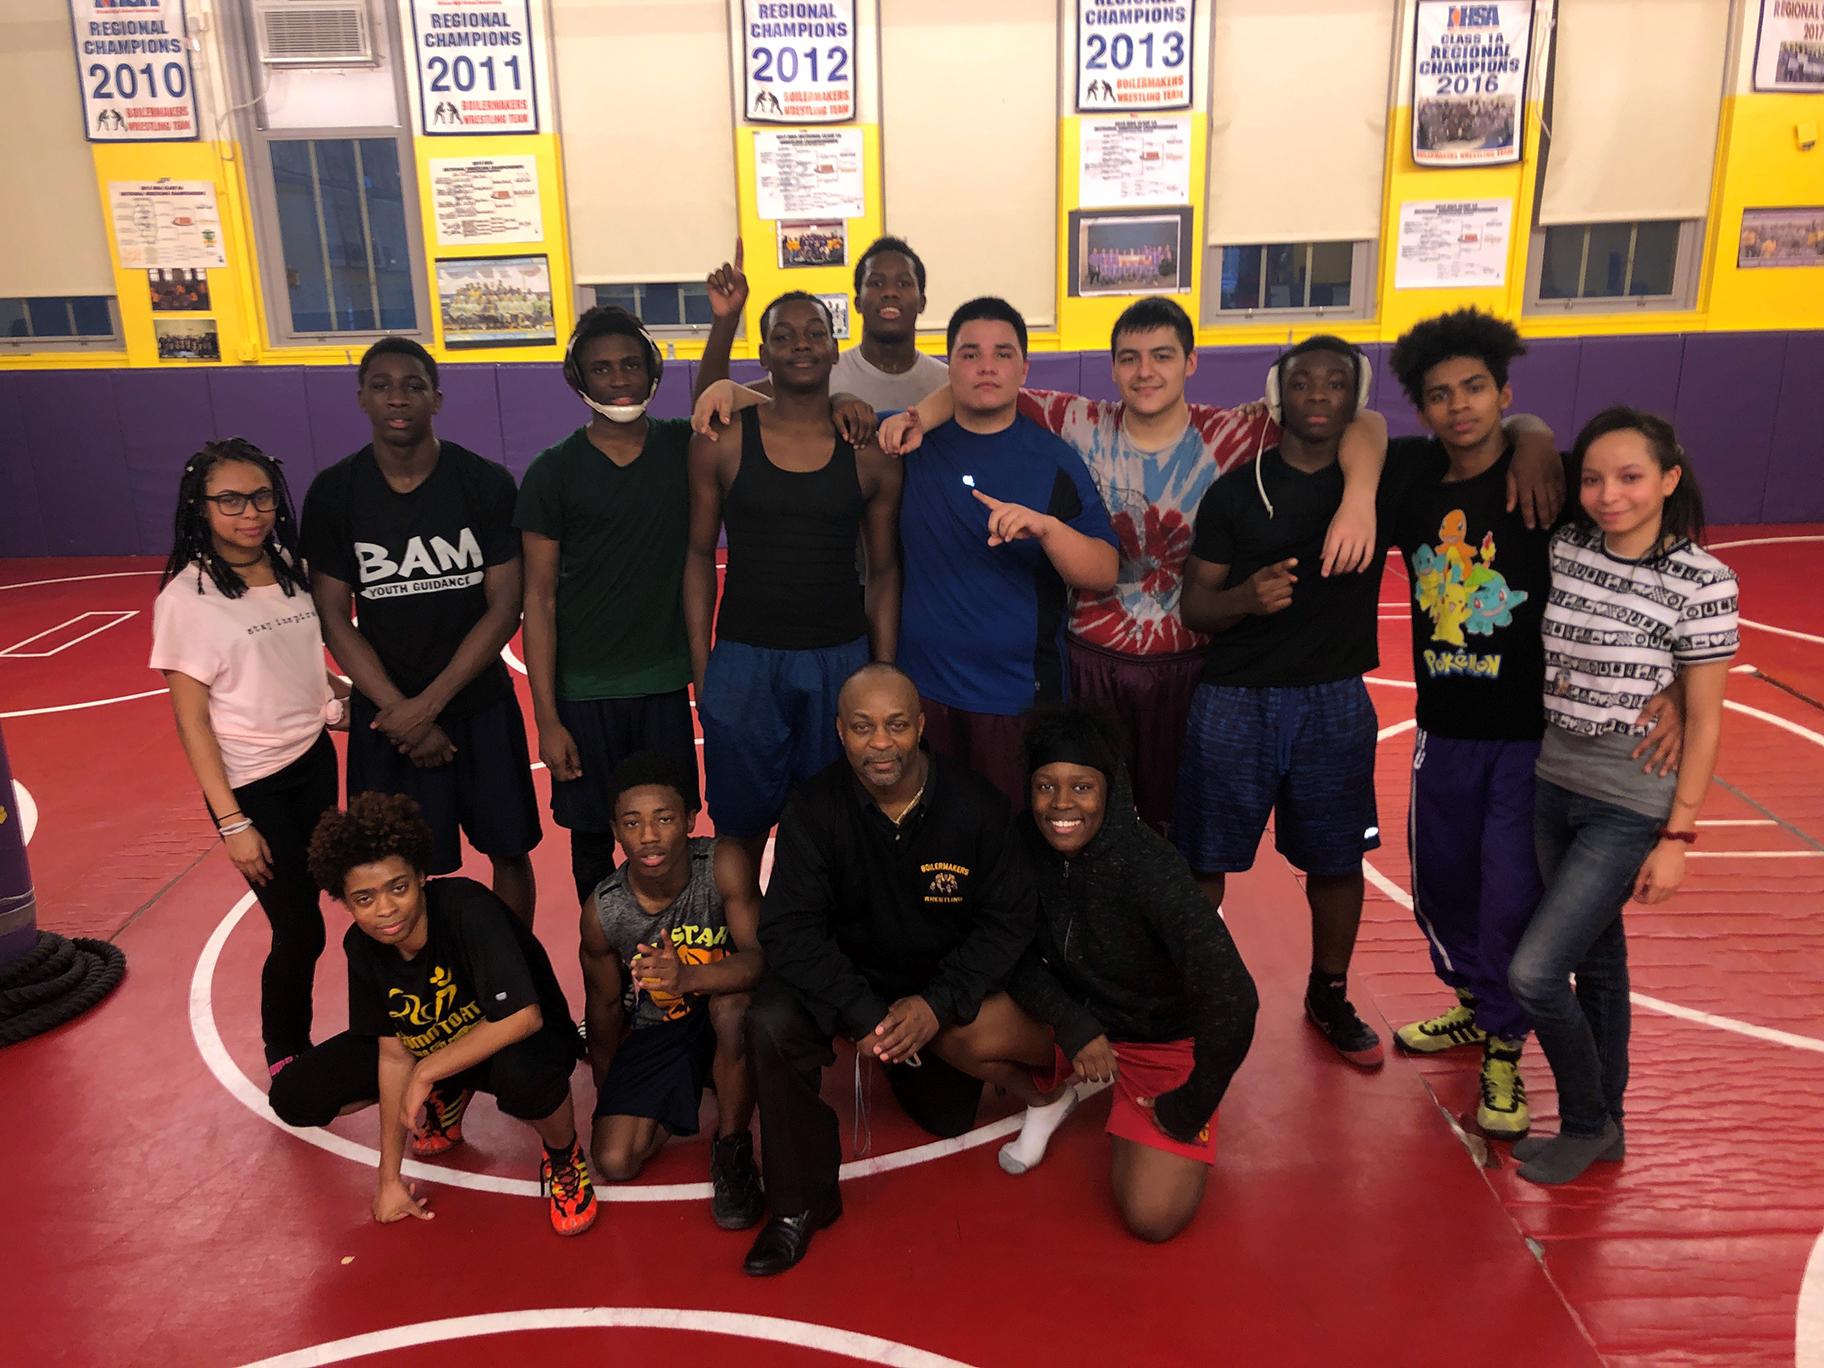 Chicago Wrestling Coach Pays It Forward While Building A Dynasty